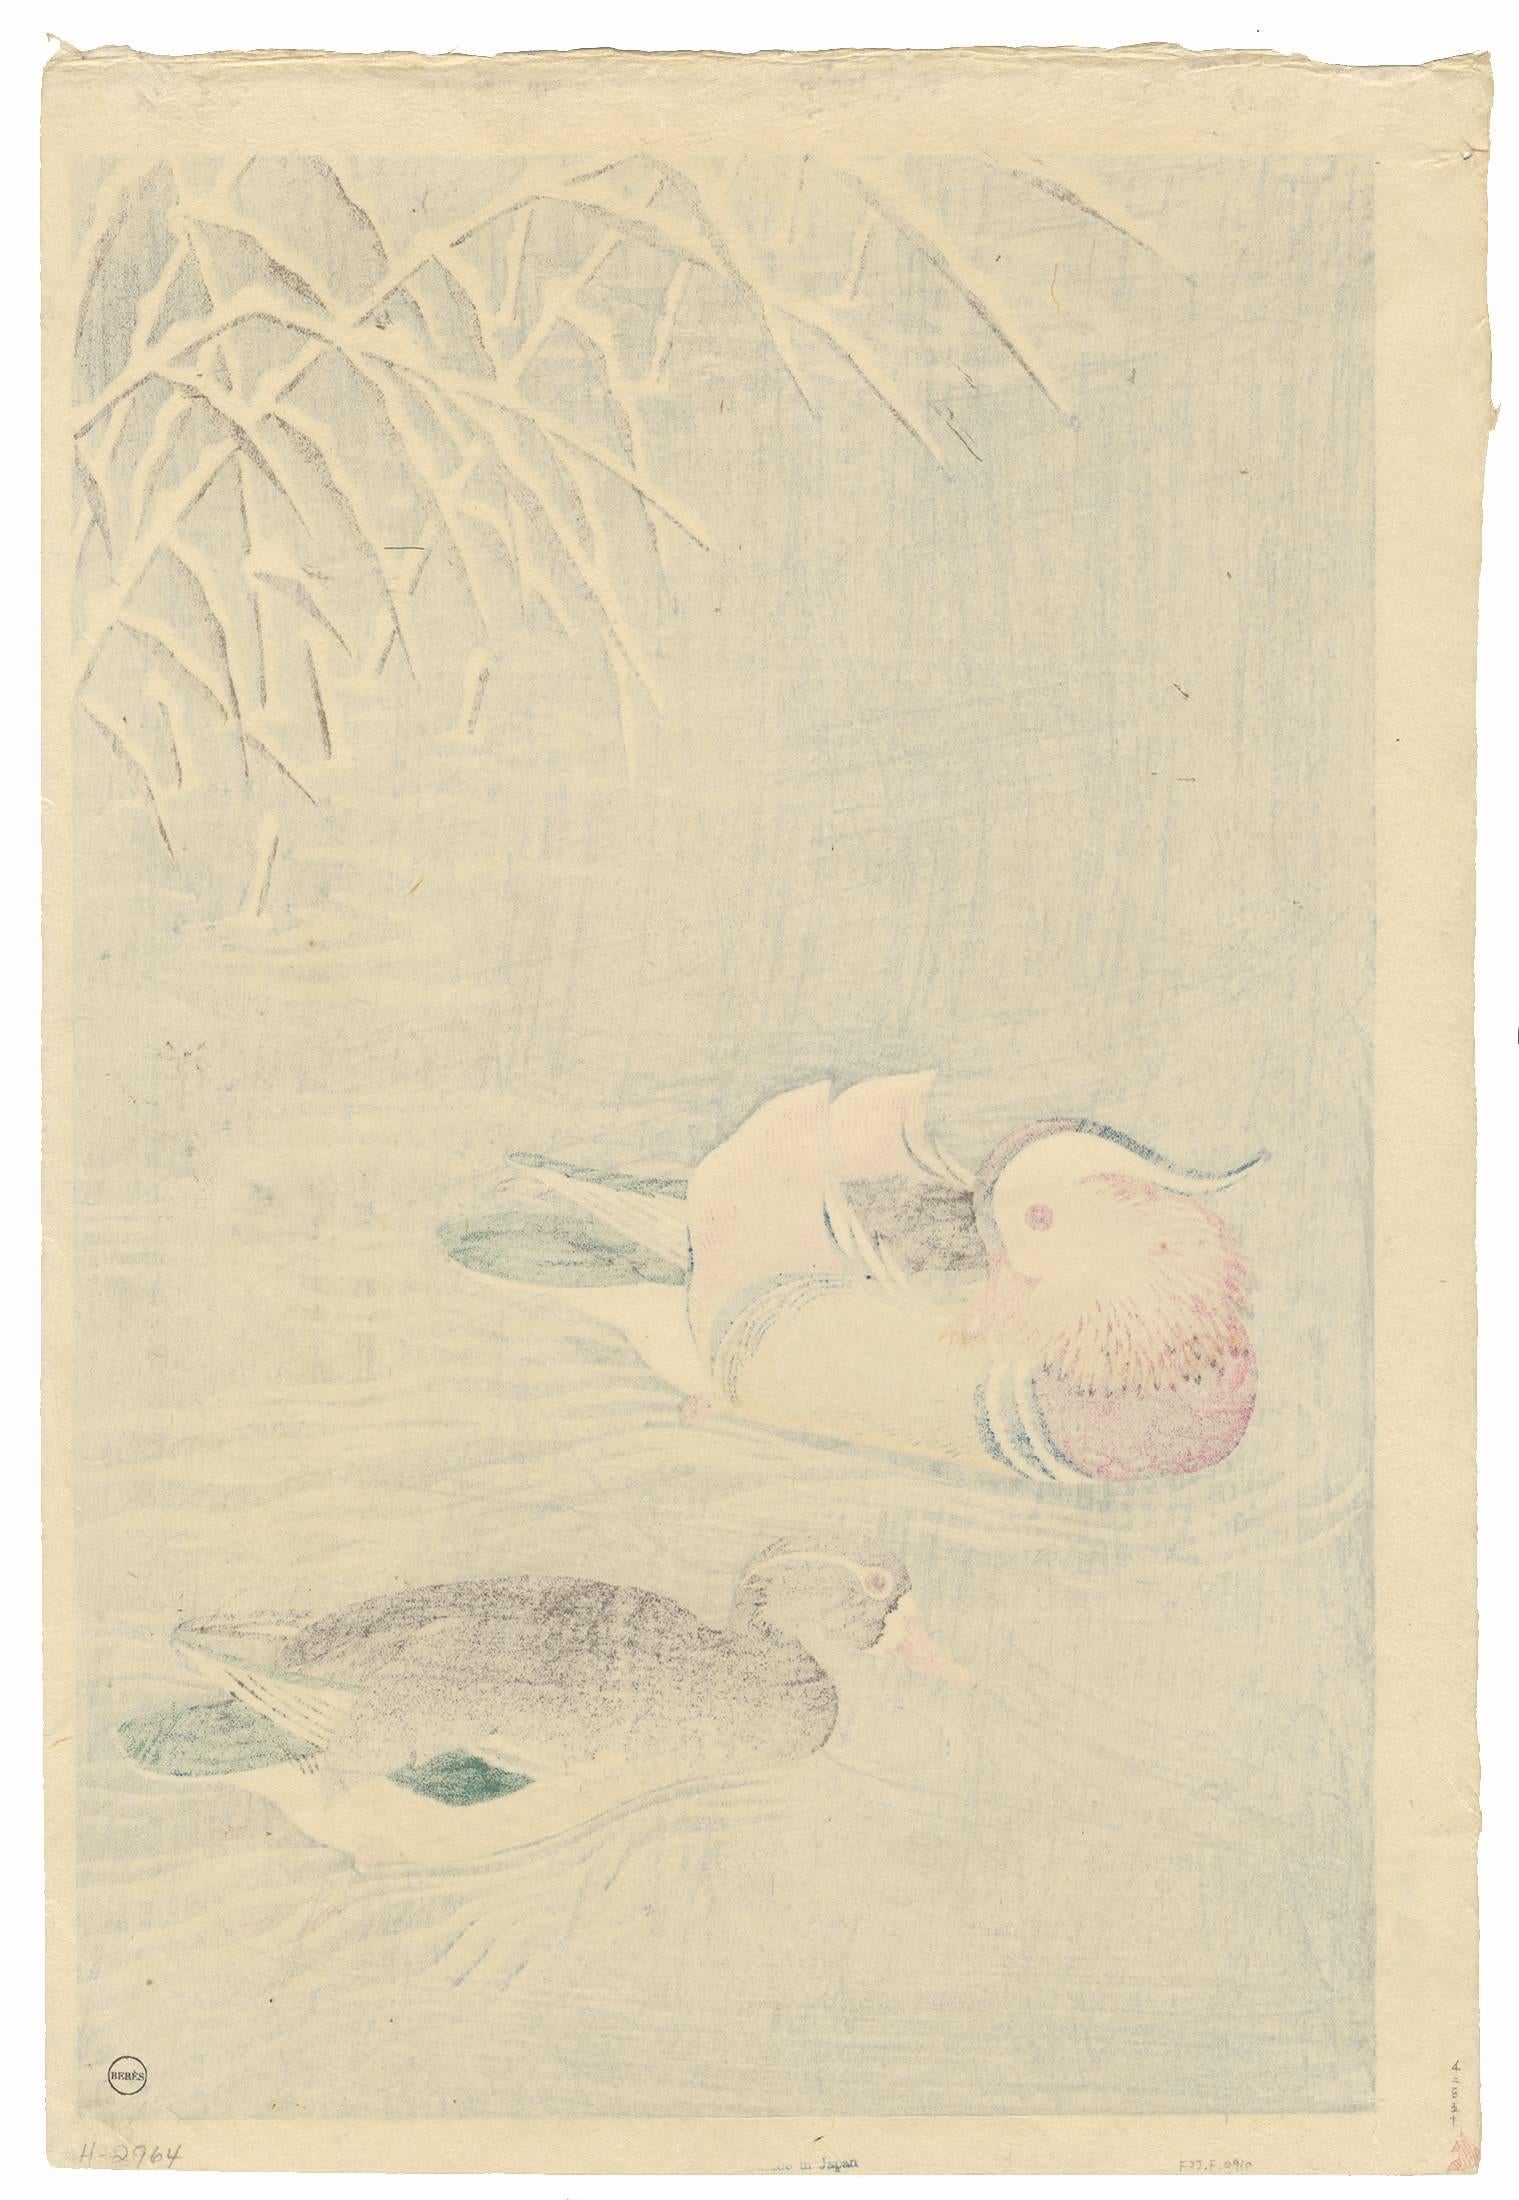 Title: Mandarin Ducks in The Snow
Artist: Koson Ohara, sealed as Shoson Ohara.
Published in 1935.
Hand-printed on Japanese washi paper.

This print shows a pair of mandarin ducks, floating on the water. Reed, heavy with snow is dipping into the